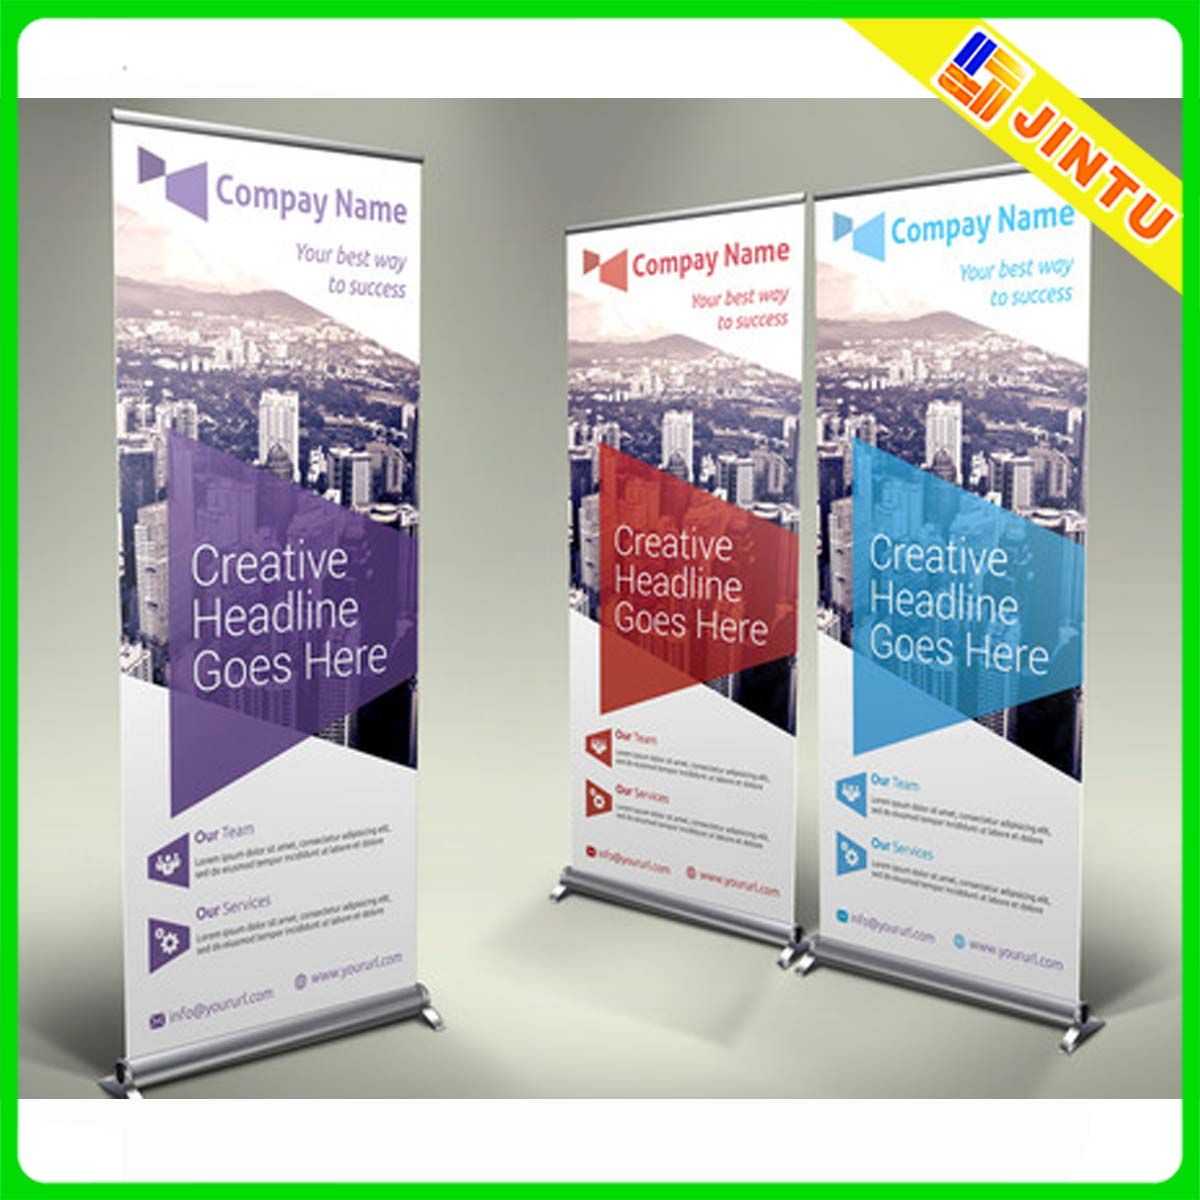 Pinnicole Kirsten On Trade Show Booth Design | Pull Up Throughout Vinyl Banner Design Templates